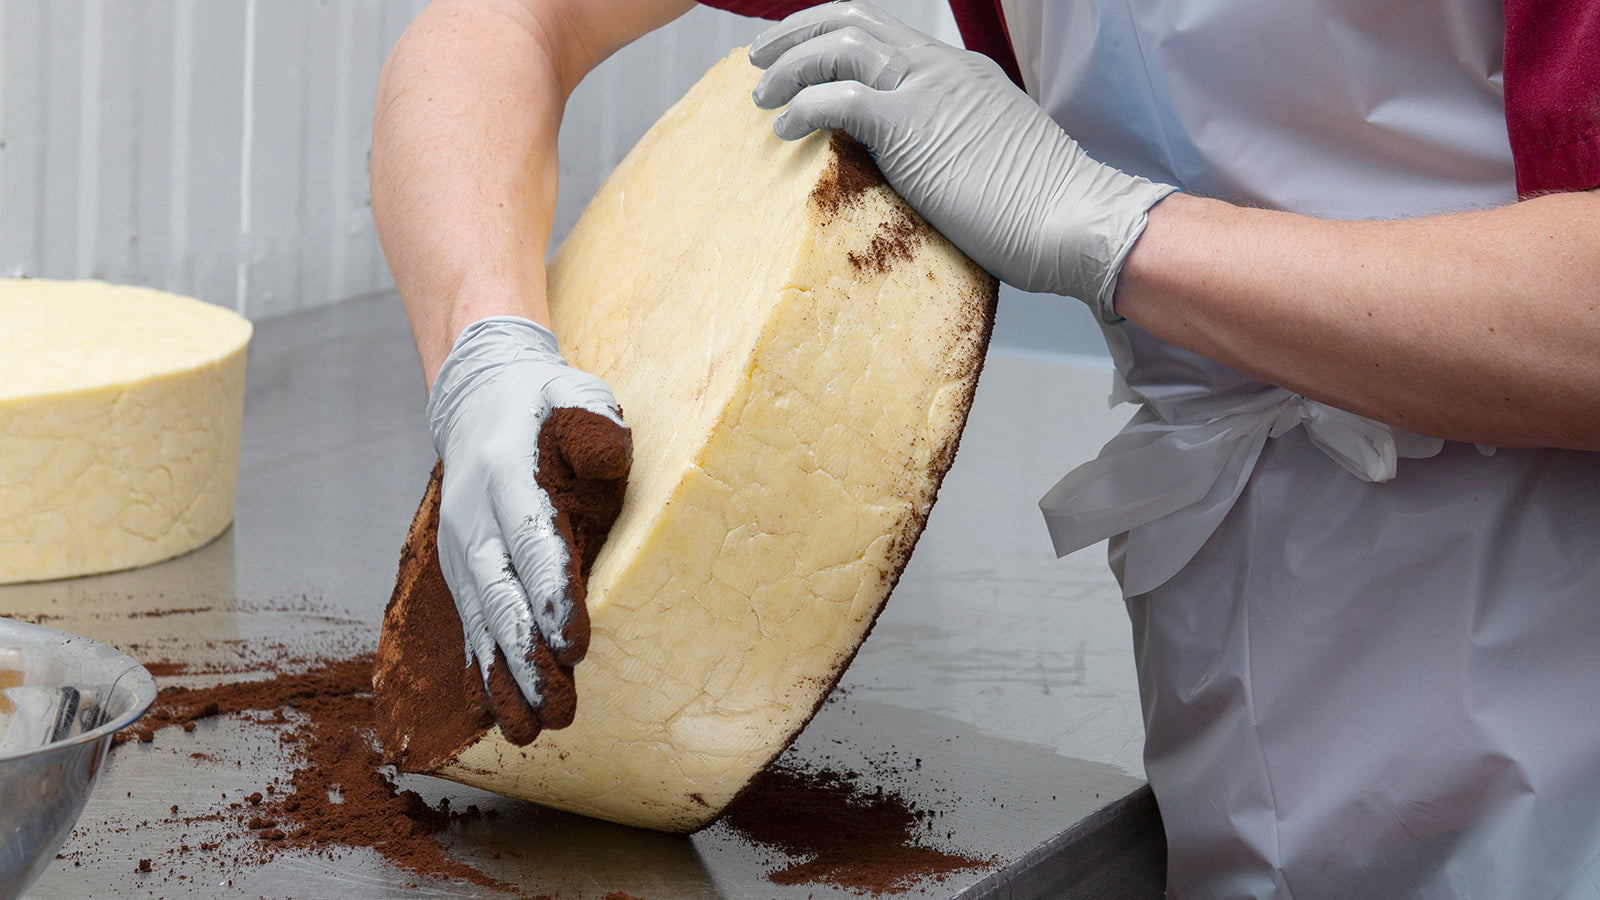 A gloved hand rubbing coffee on a 20 pound wheel of cheddar